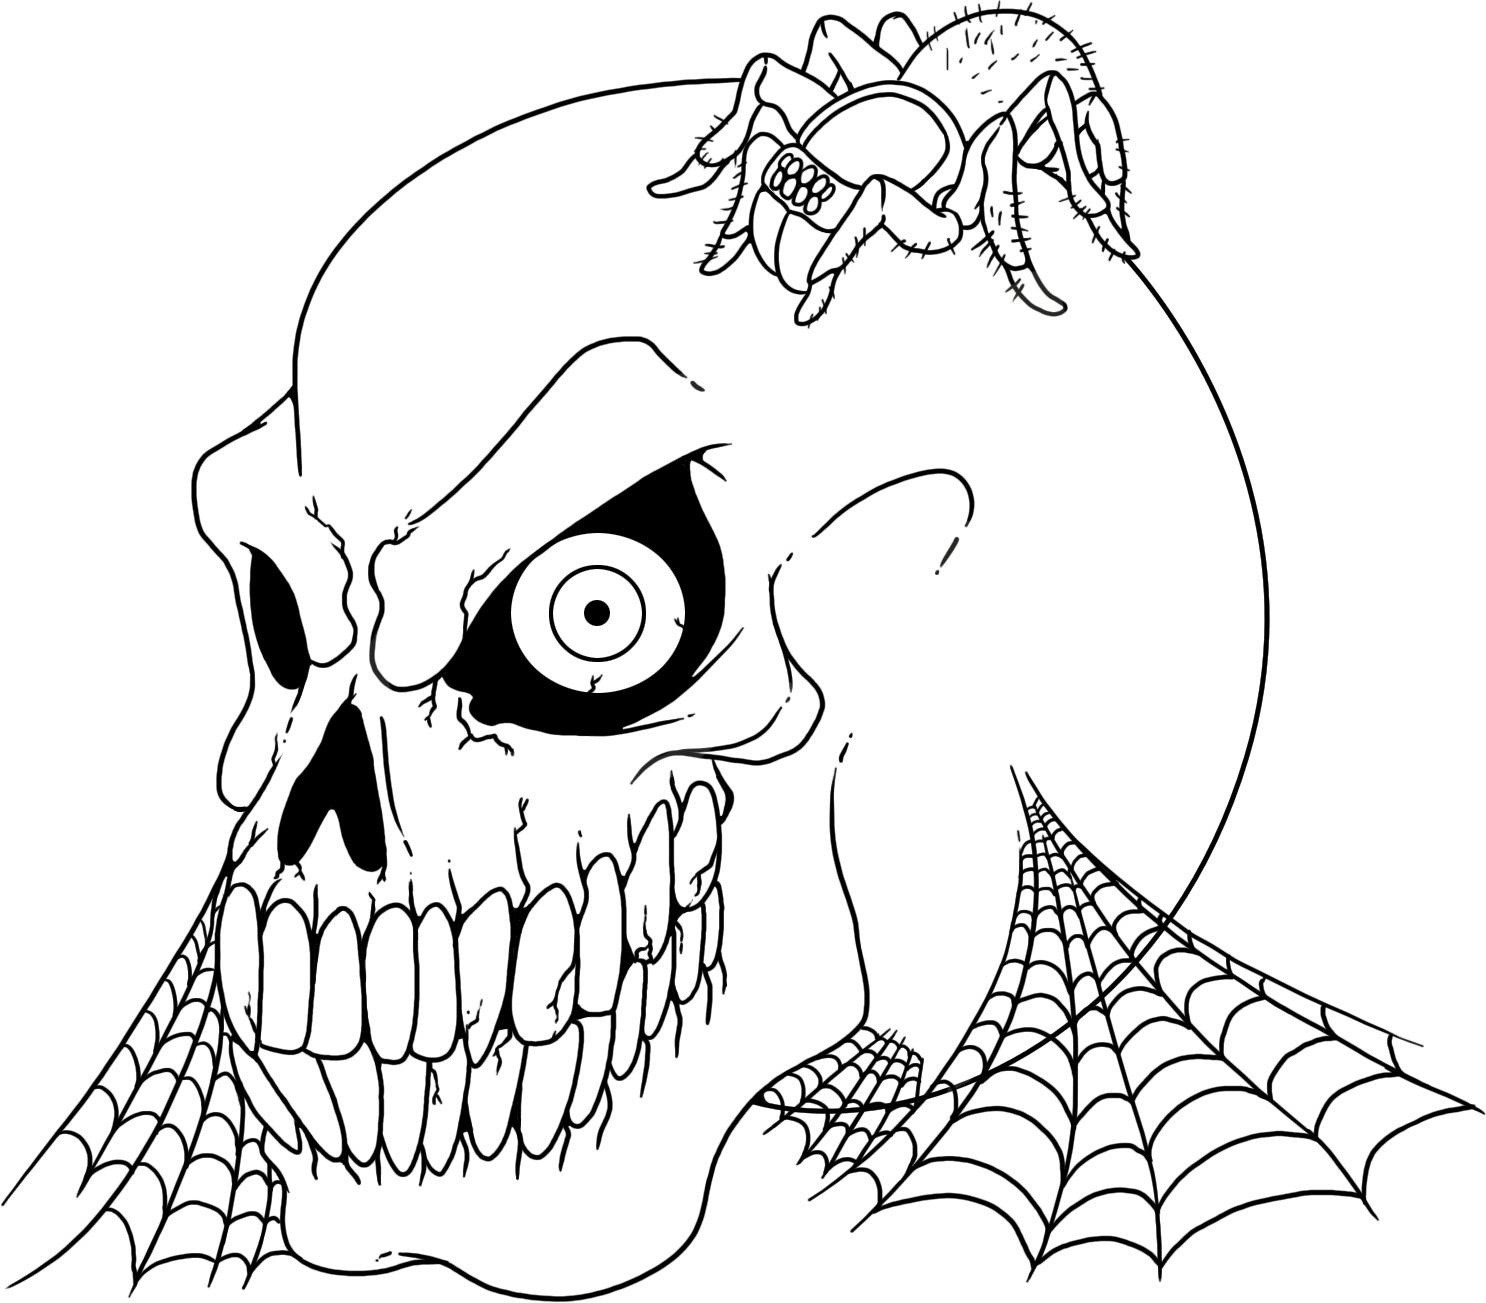 Coloring Pages For Boys Skeletons
 Free Printable Skull Coloring Pages For Kids